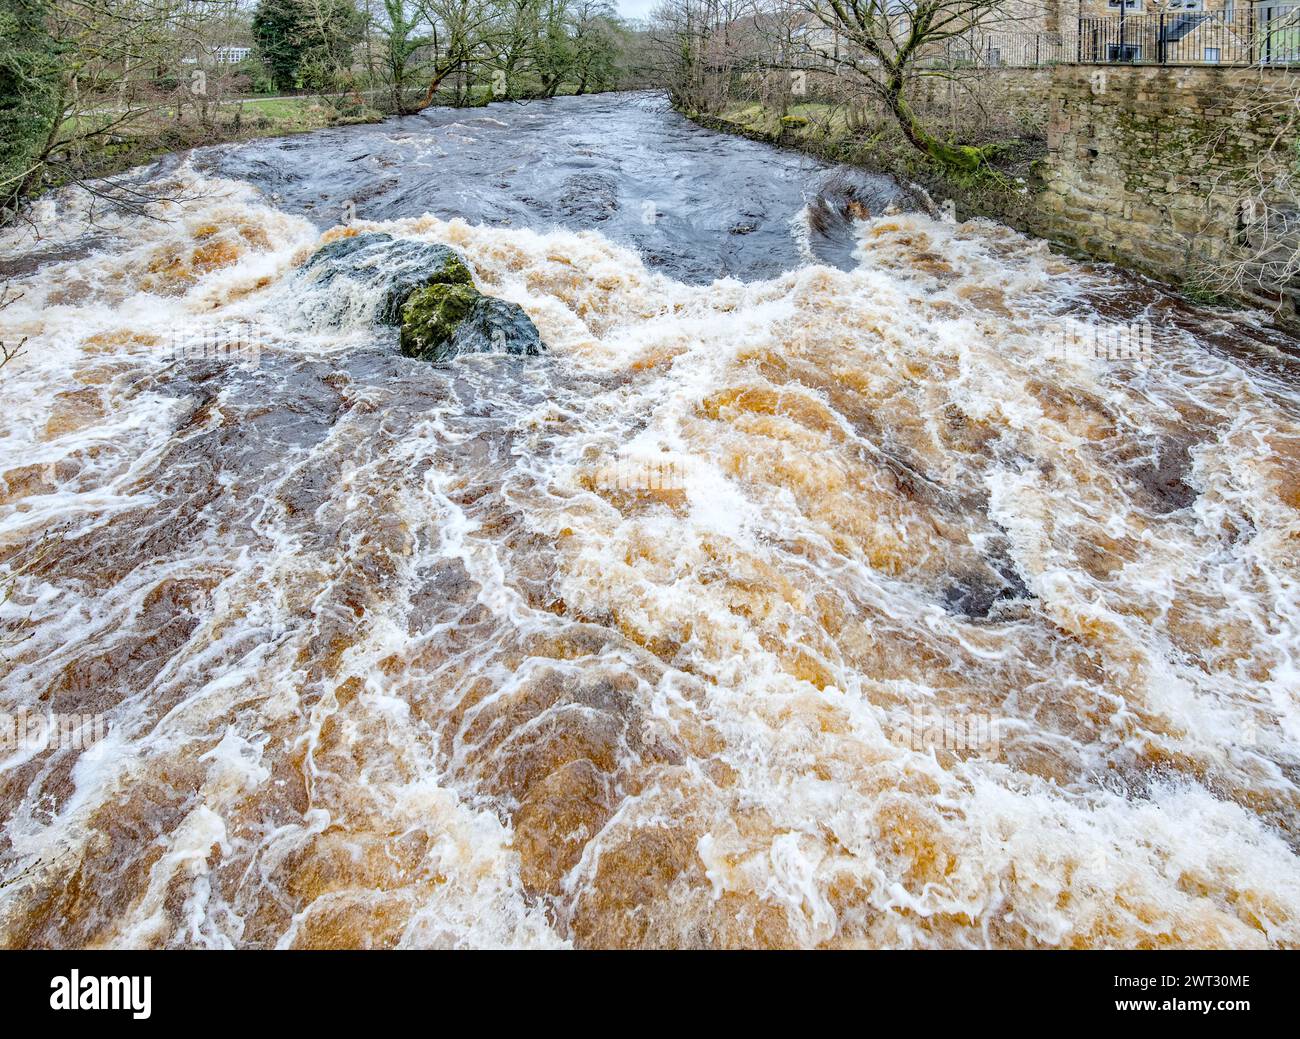 A thunderous roar of water at Queens rock on the River Ribble, Kingsmill, Settle North Yorkshire Stock Photo